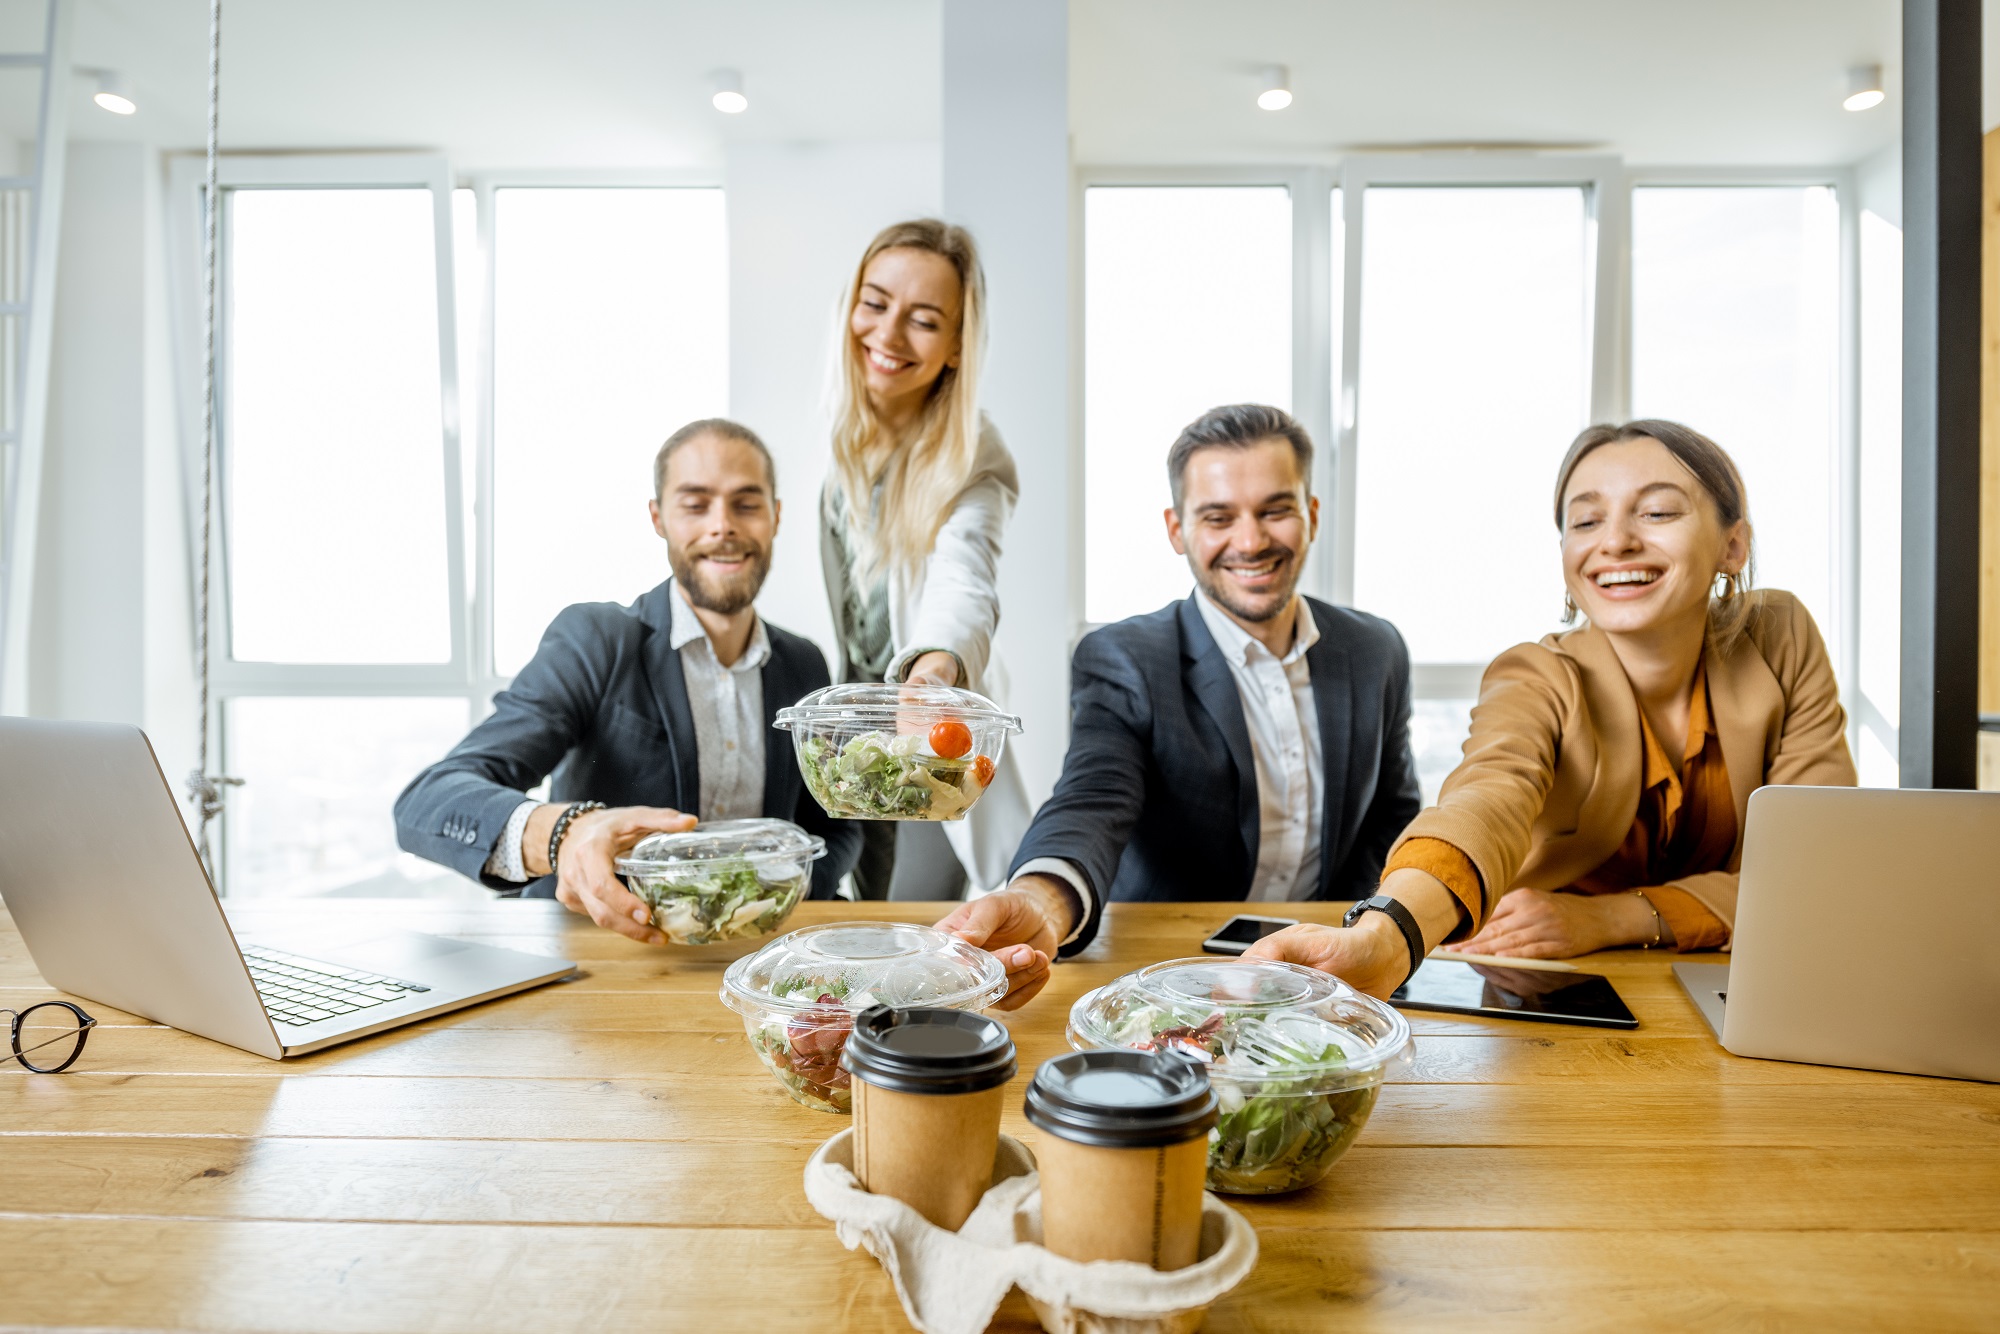 The Importance of Providing Food Options in the Workplace